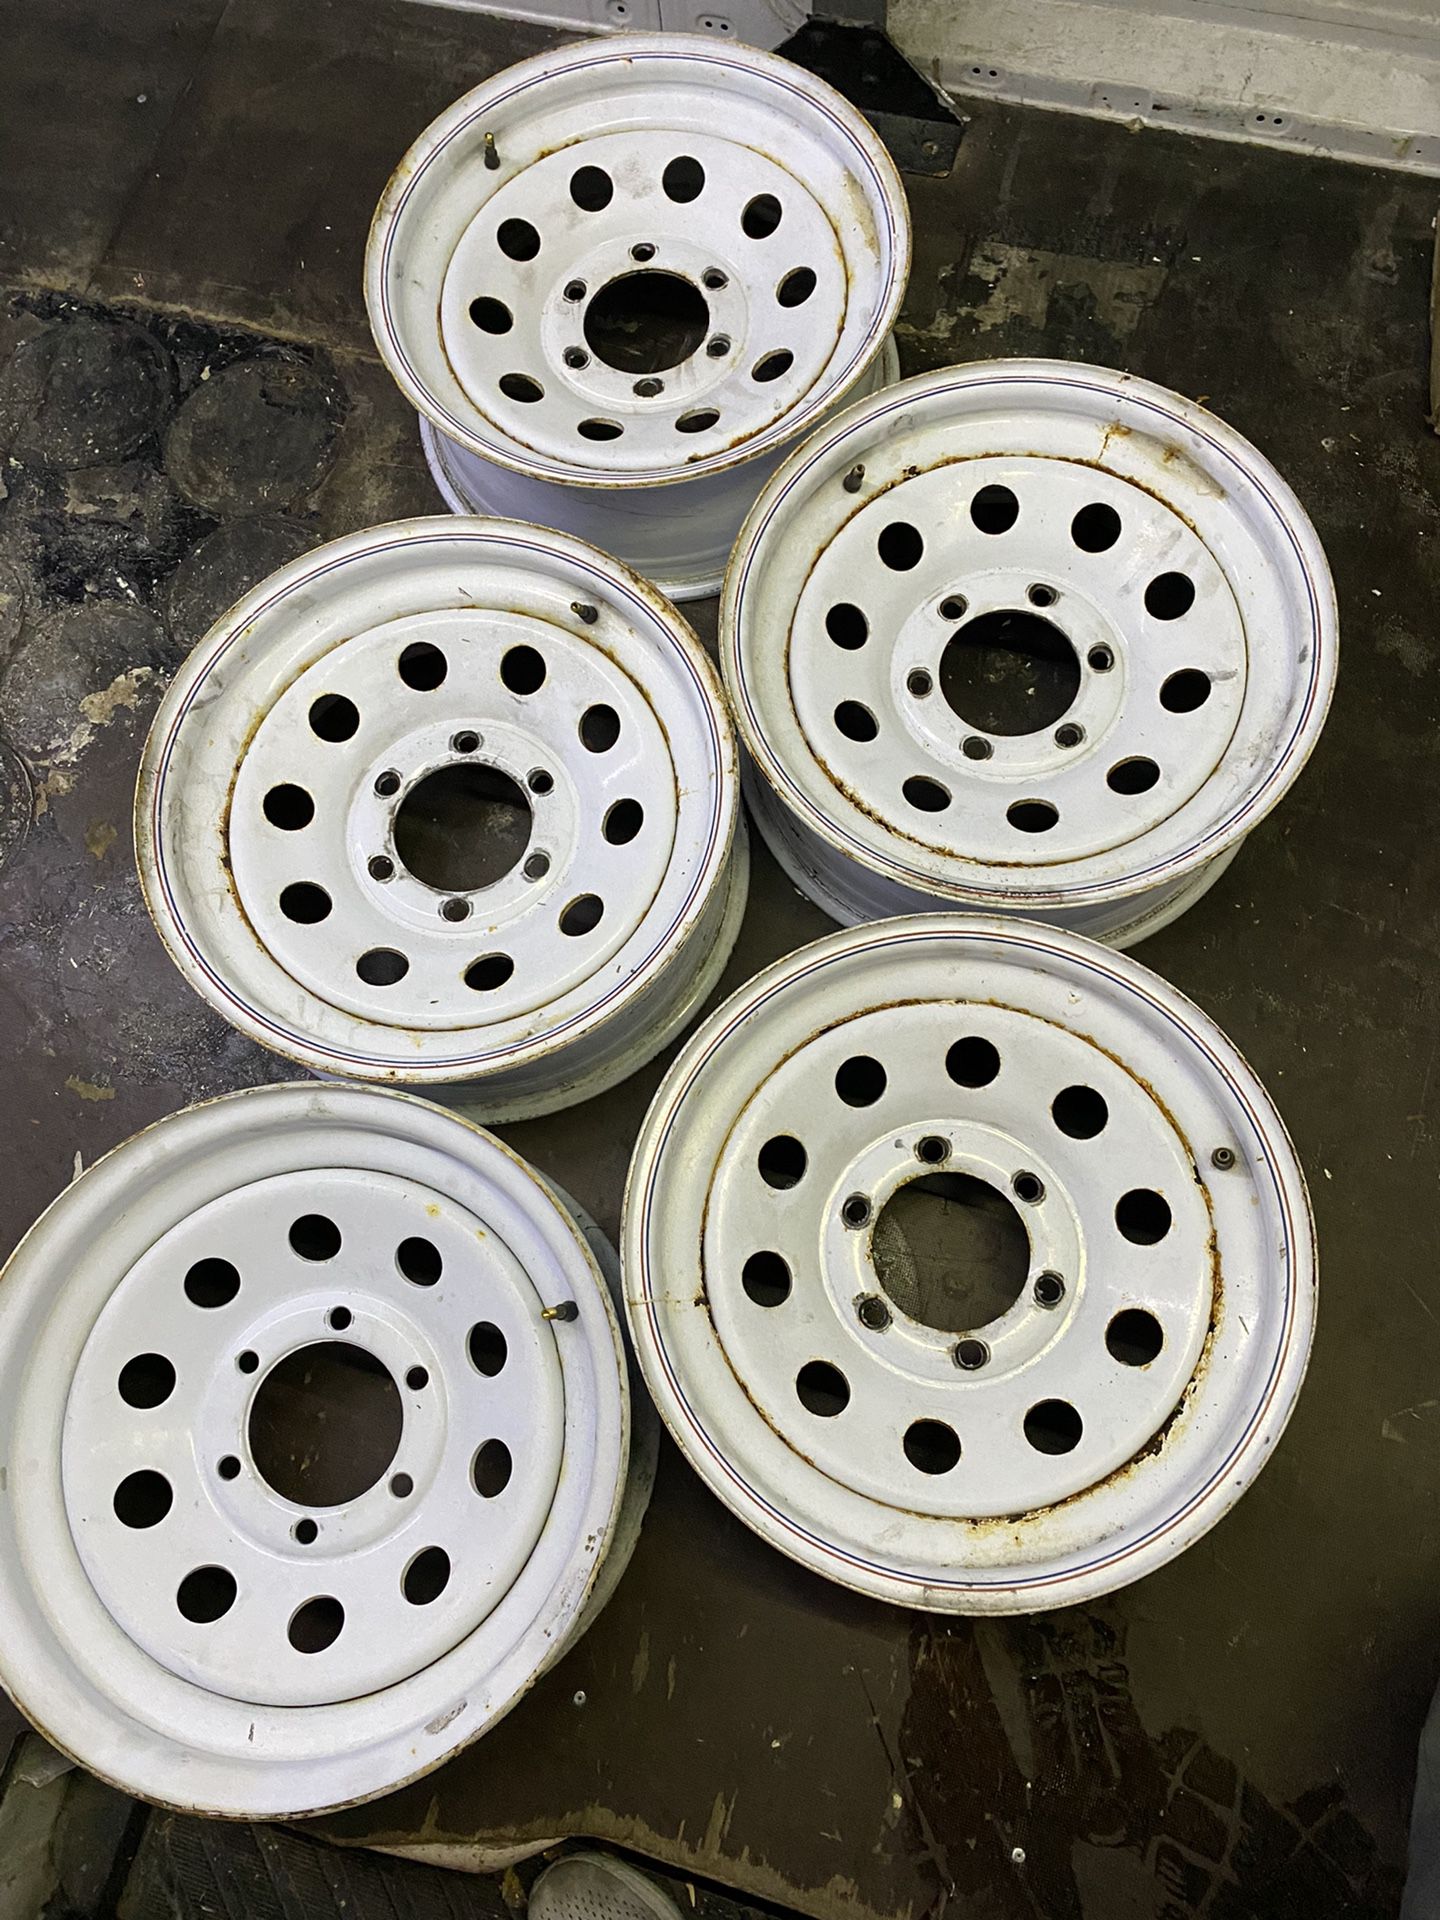 Trailer wheels with spare 16”